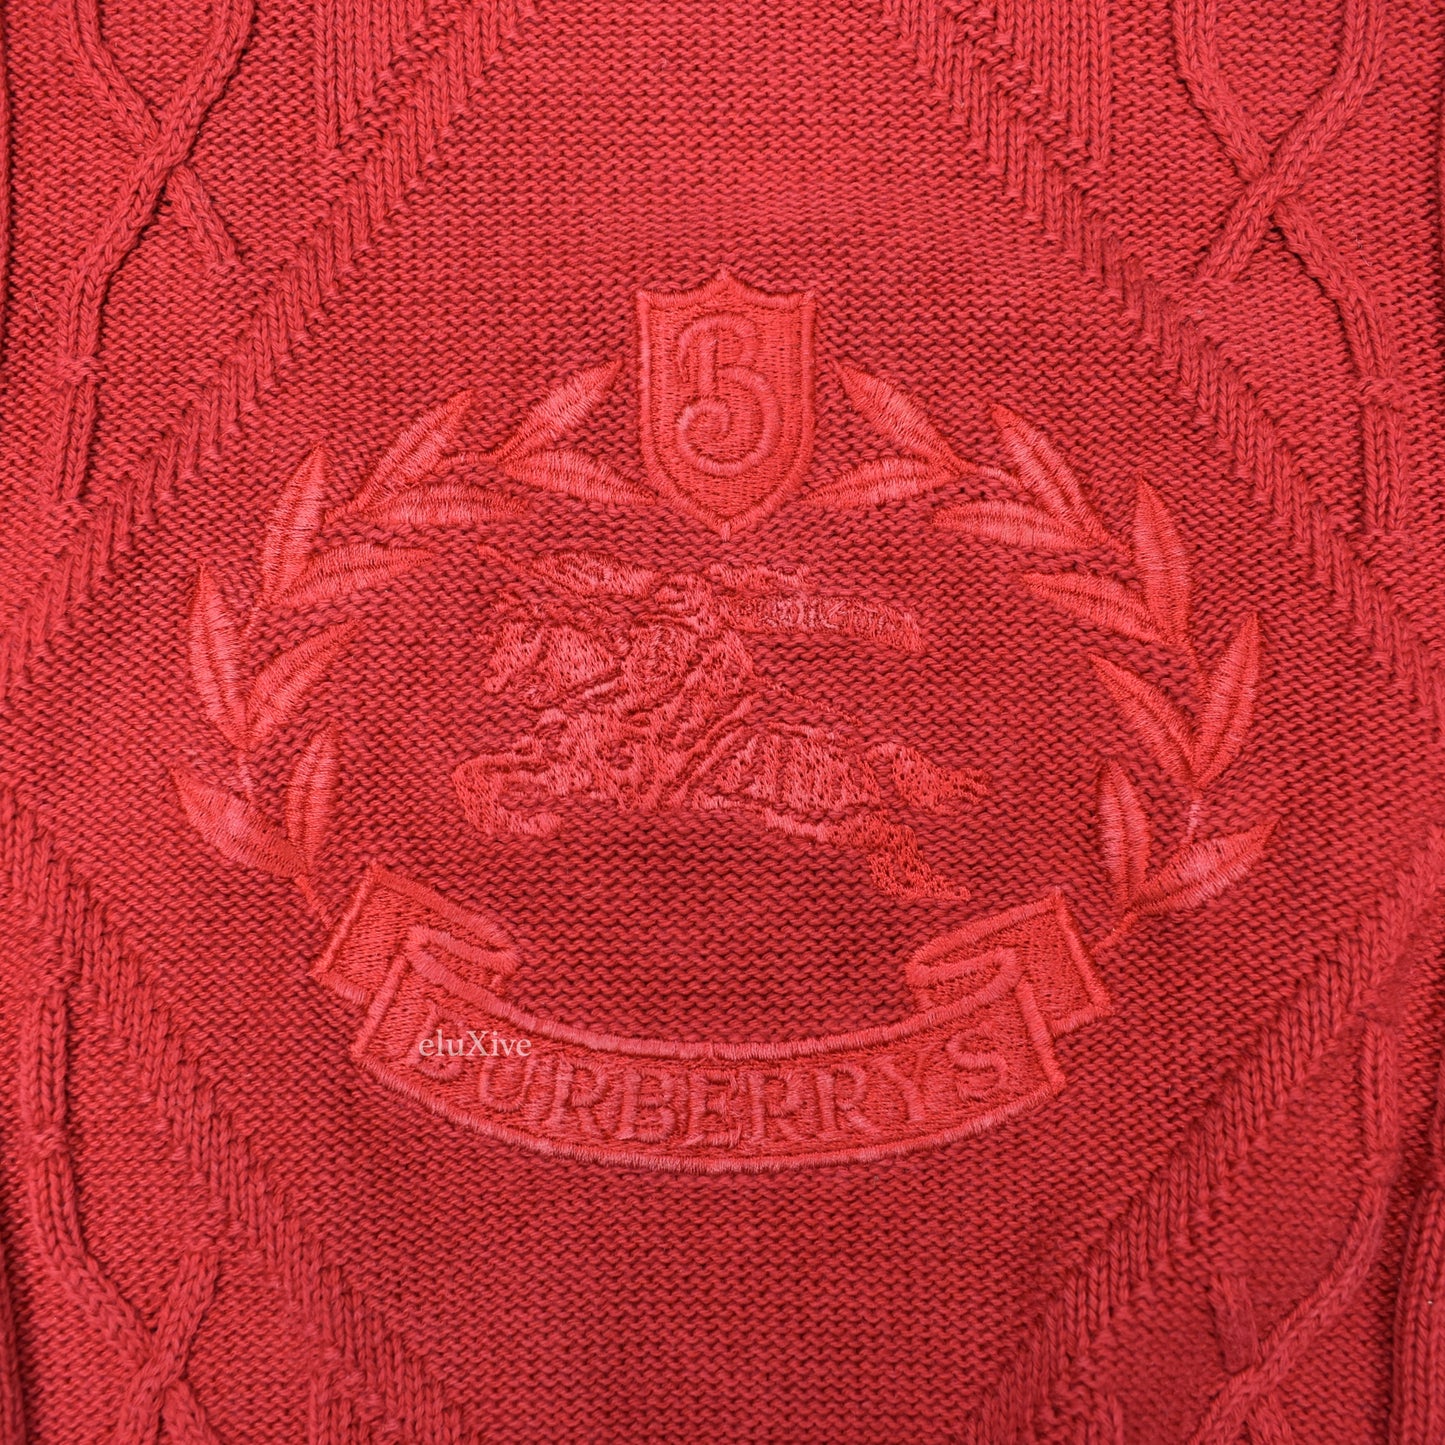 Burberry - Red Vintage Crest Logo Sweater